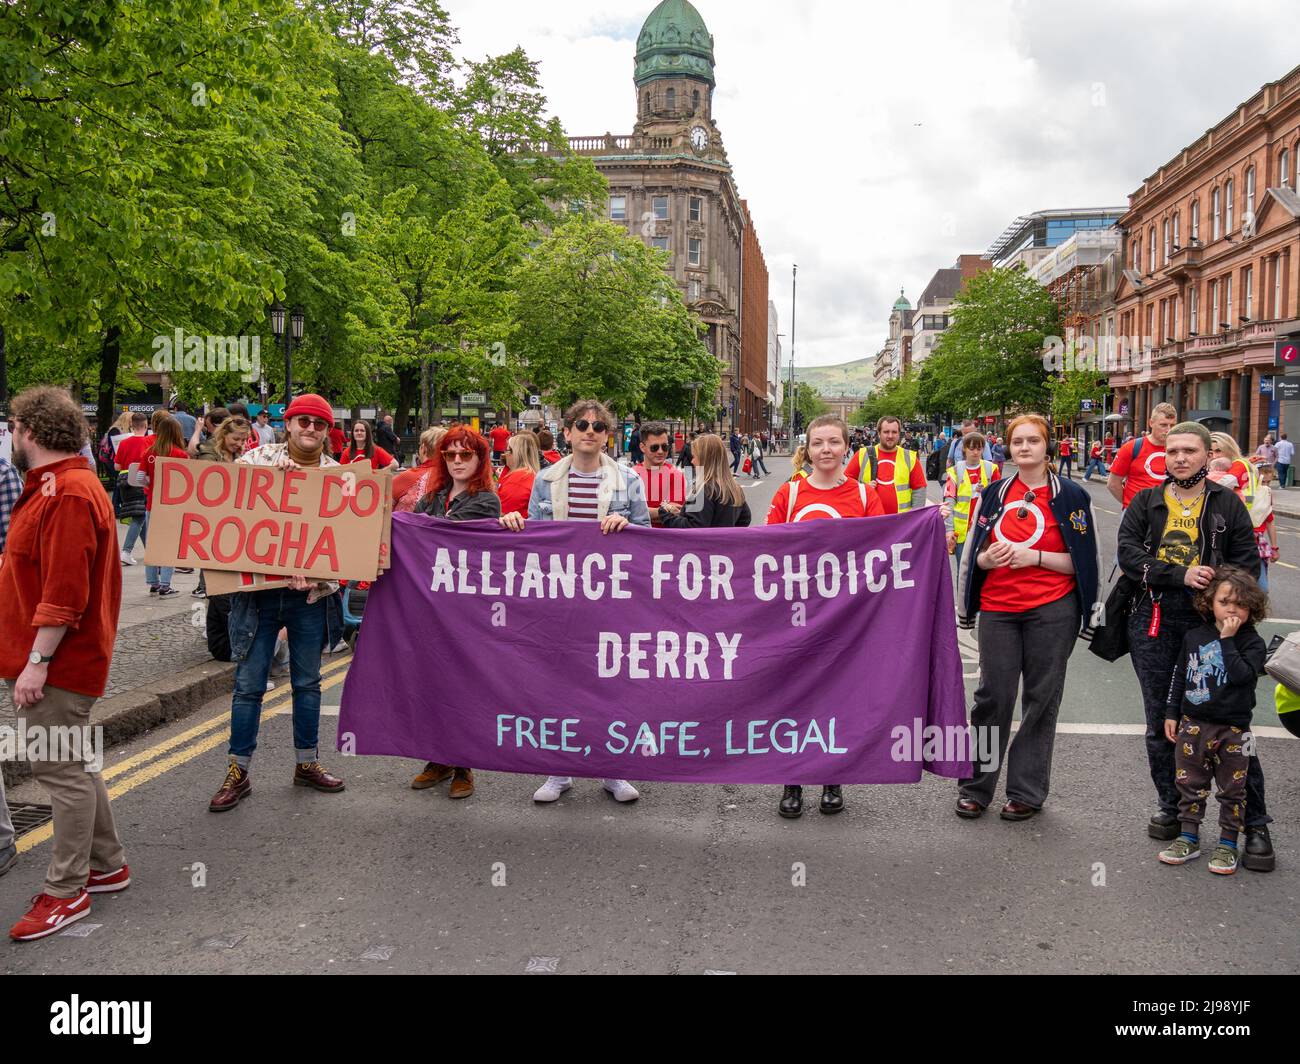 Belfast, Northern Ireland, UK, 21 May 2022. Irish language rally, Belfast. Thousands attended a rally in Belfast calling for Irish language legislation. The protesters marched from West Belfast to City Hall where they were addressed by Irish speakers. The event was organised by An Dream Dearg. Stock Photo